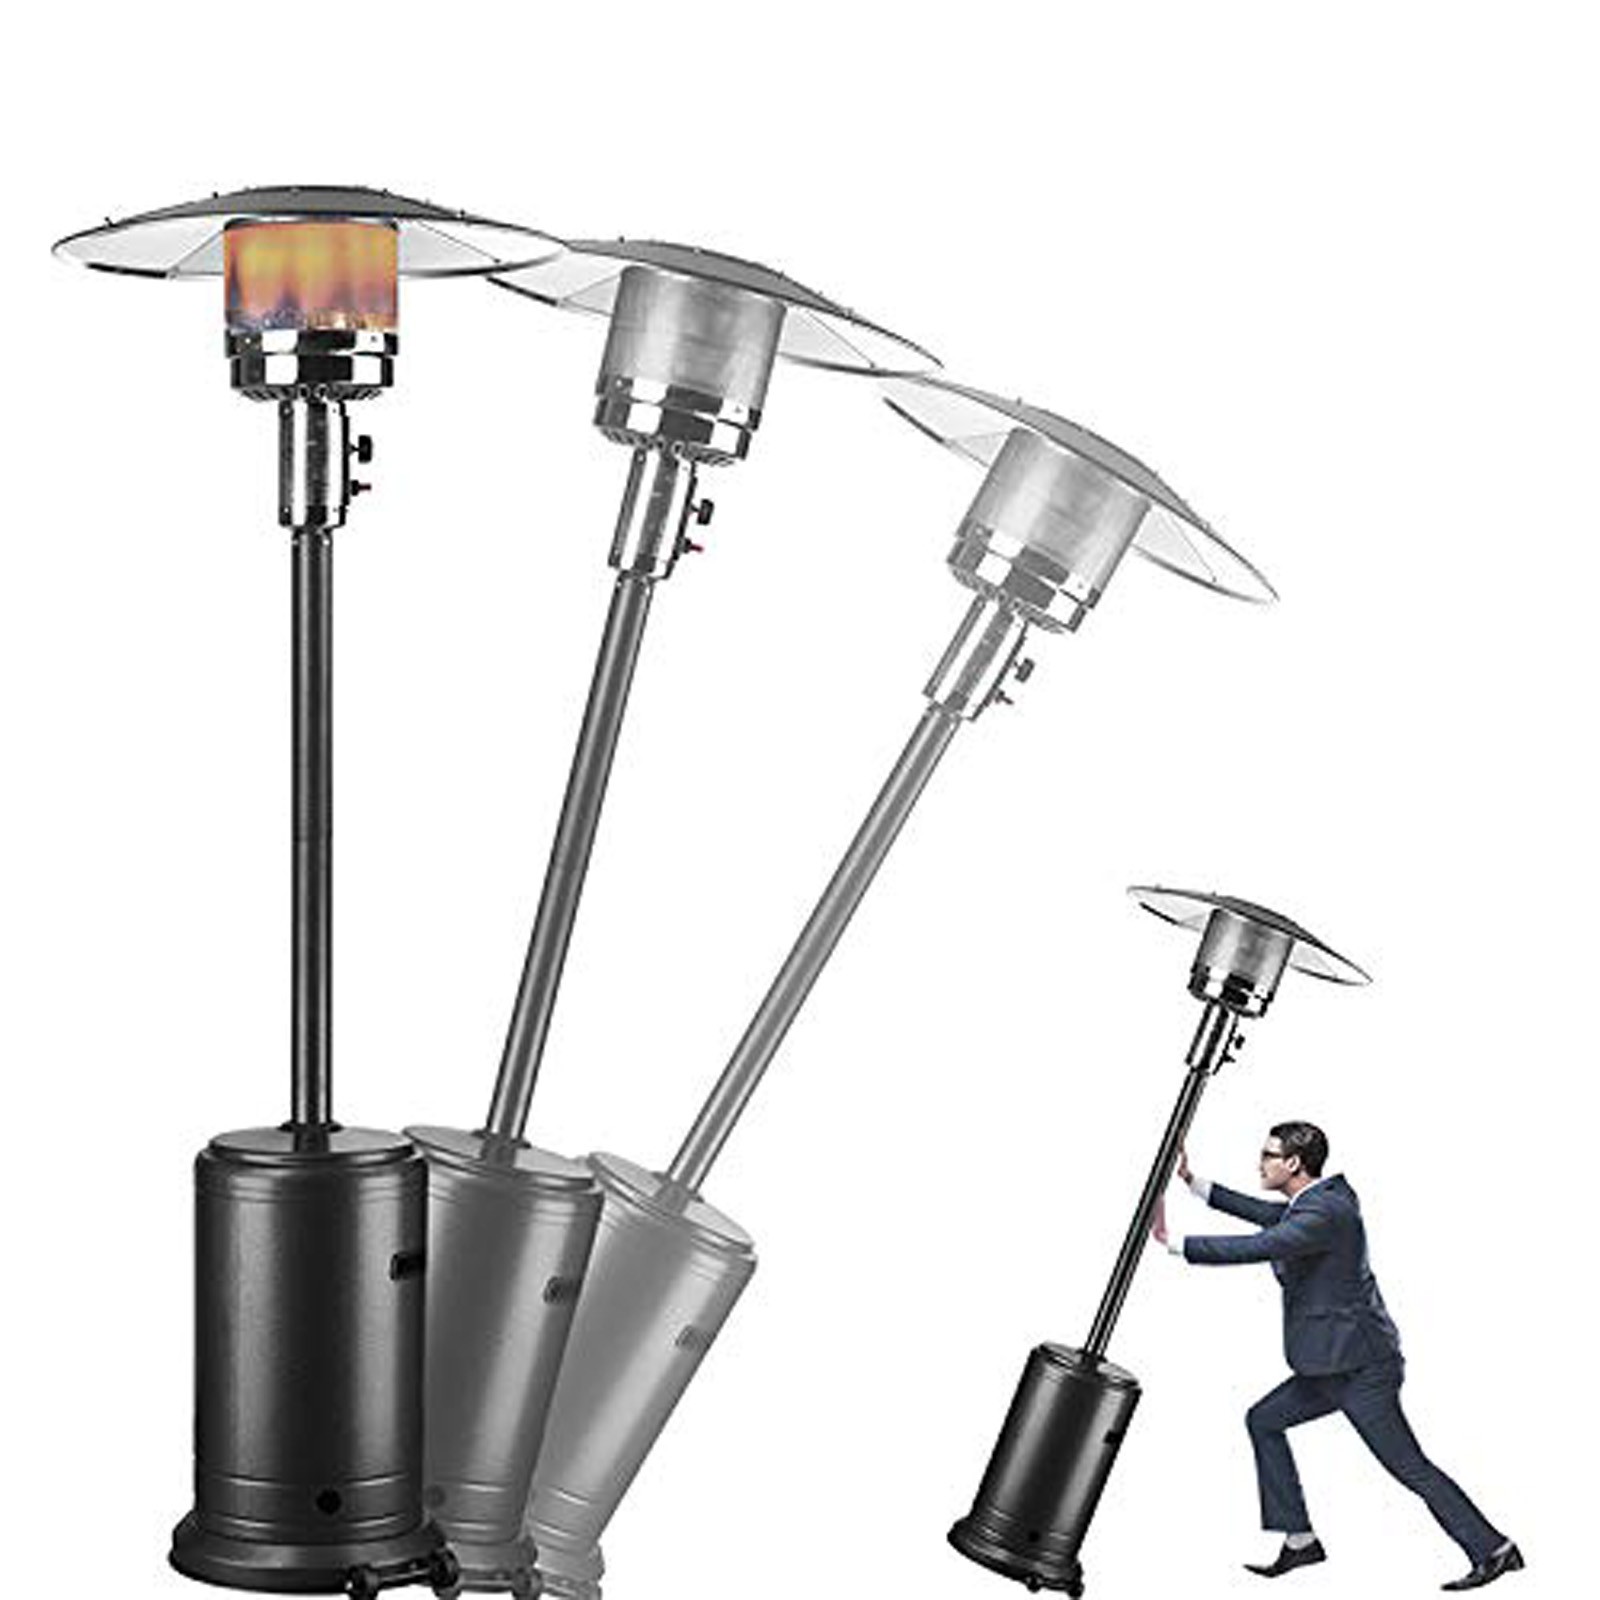 high quality top selling product in 2020 Propane Patio Heater with Wheels and Table Large Support Wholesale and Dropshipping #Z